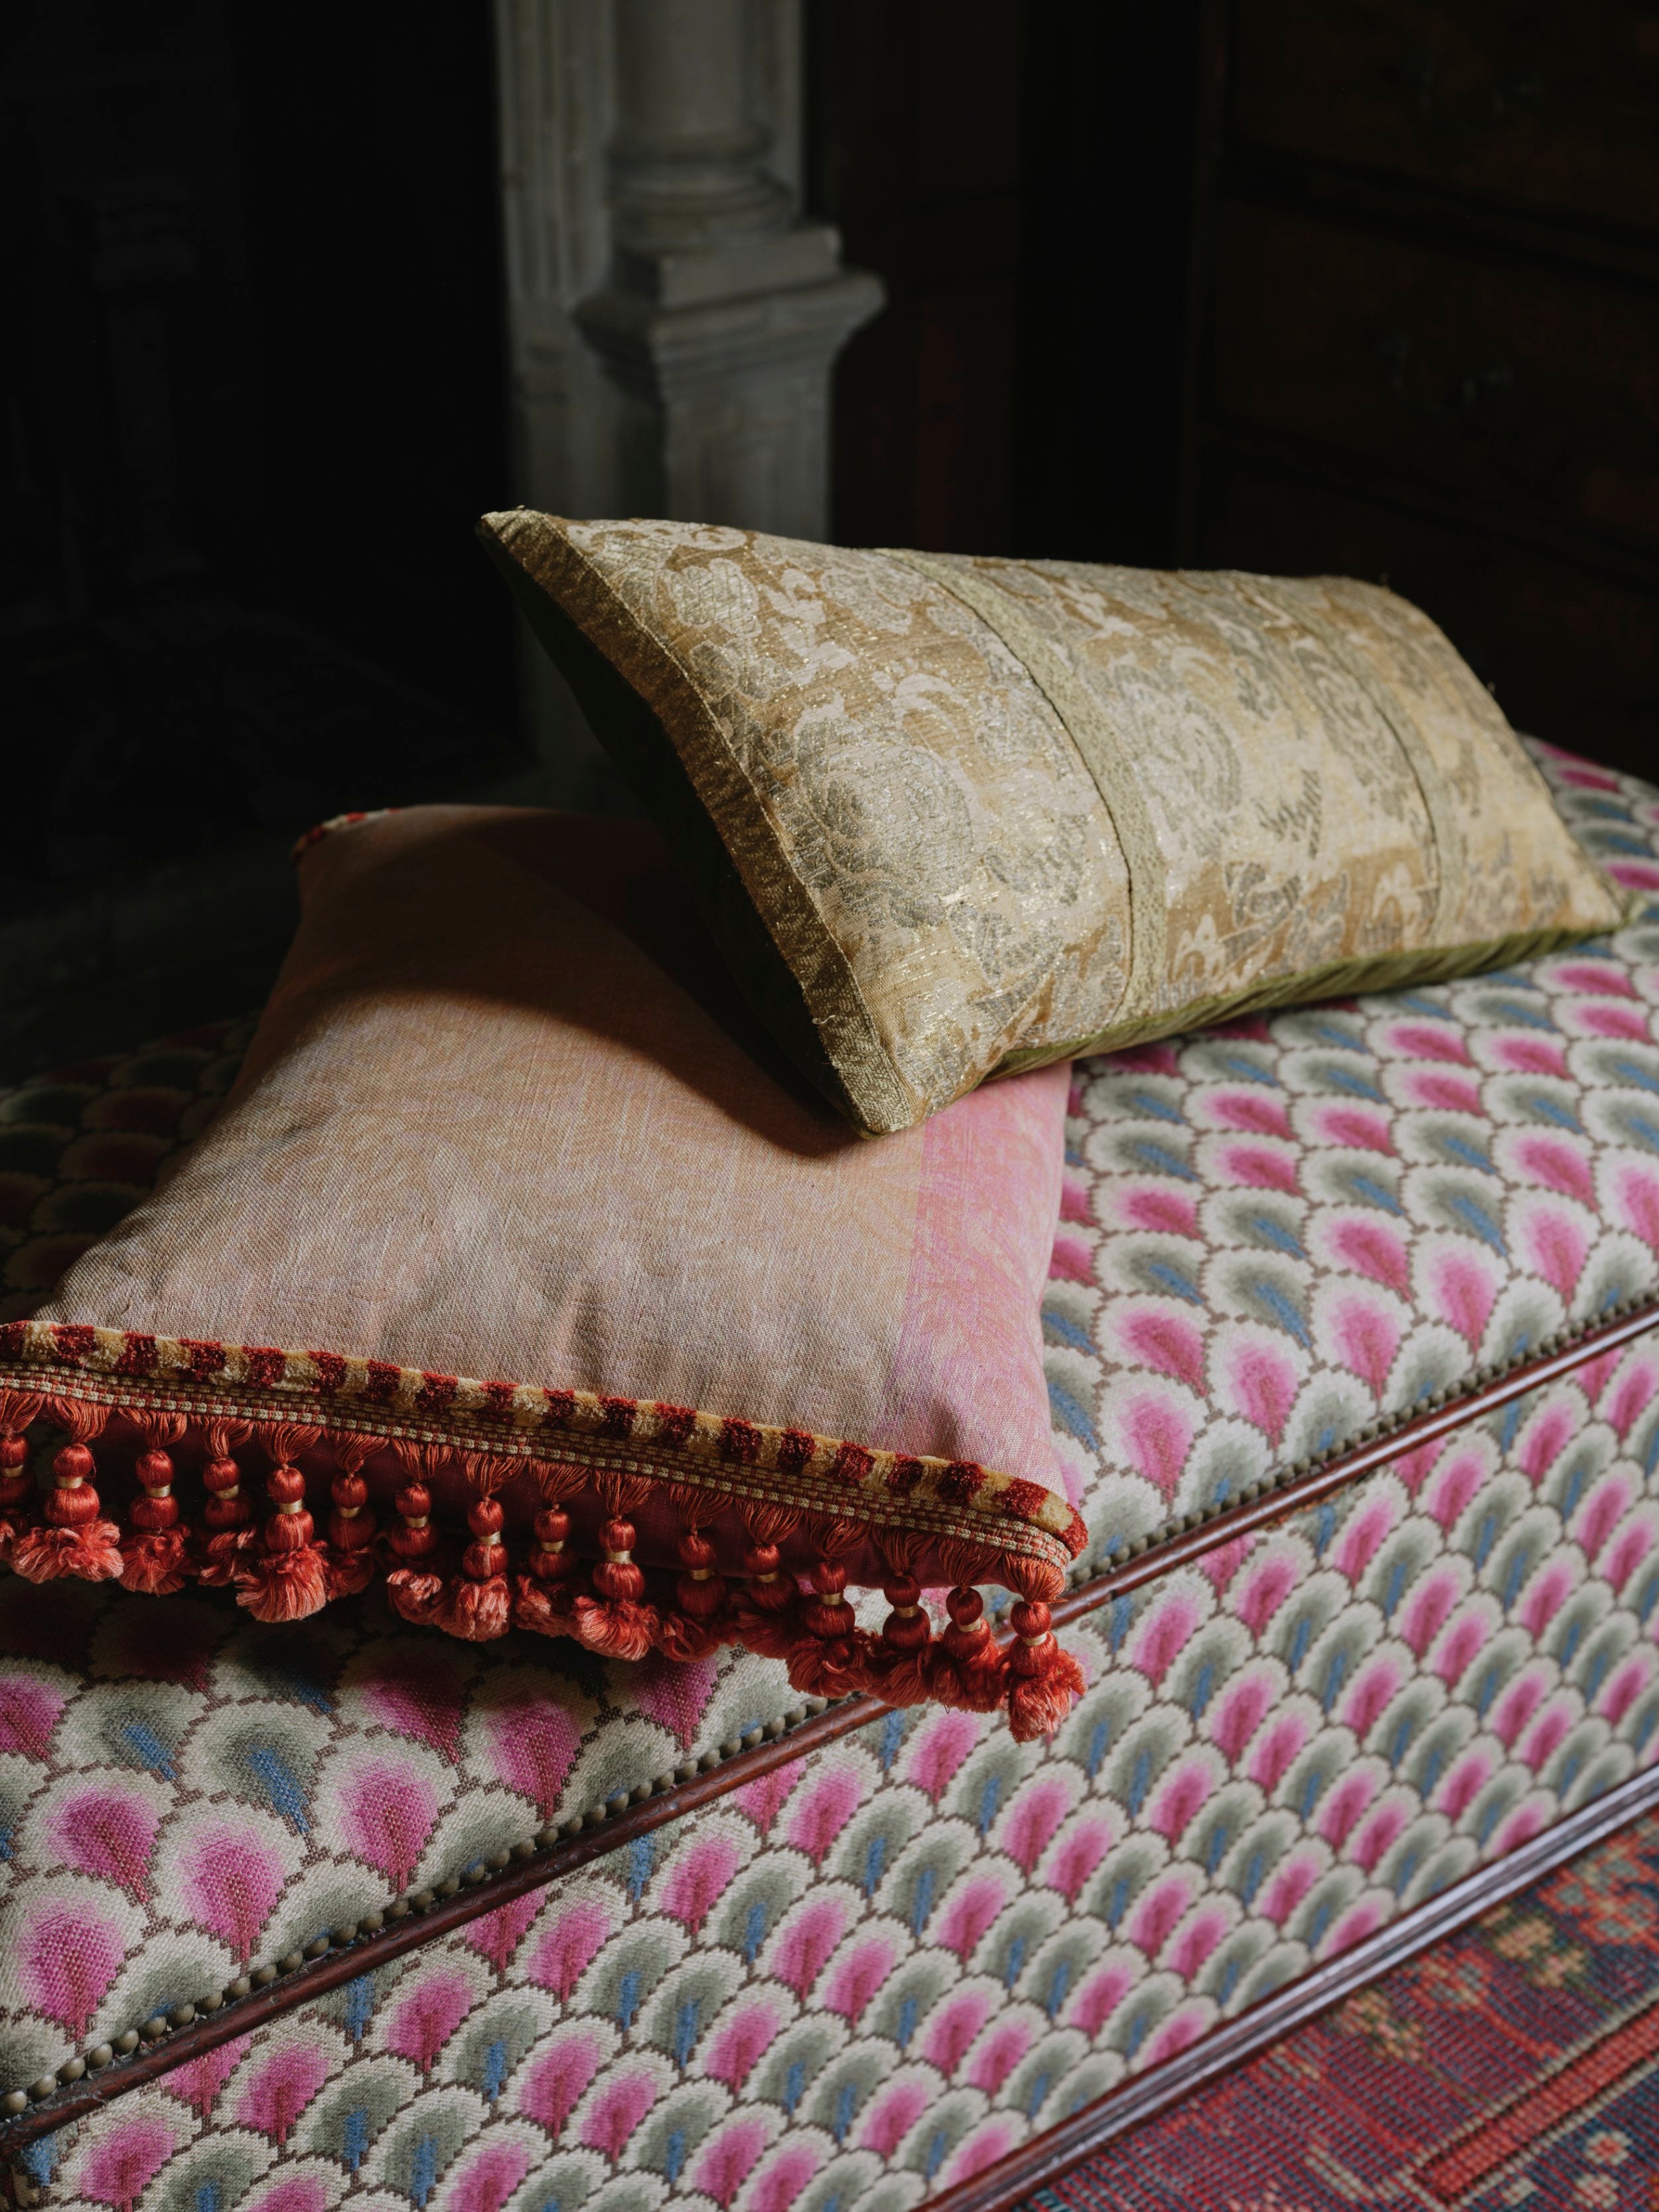 A Pair of Cushions made from Early 18th Century Gold Weave Brocade with their Original Braid